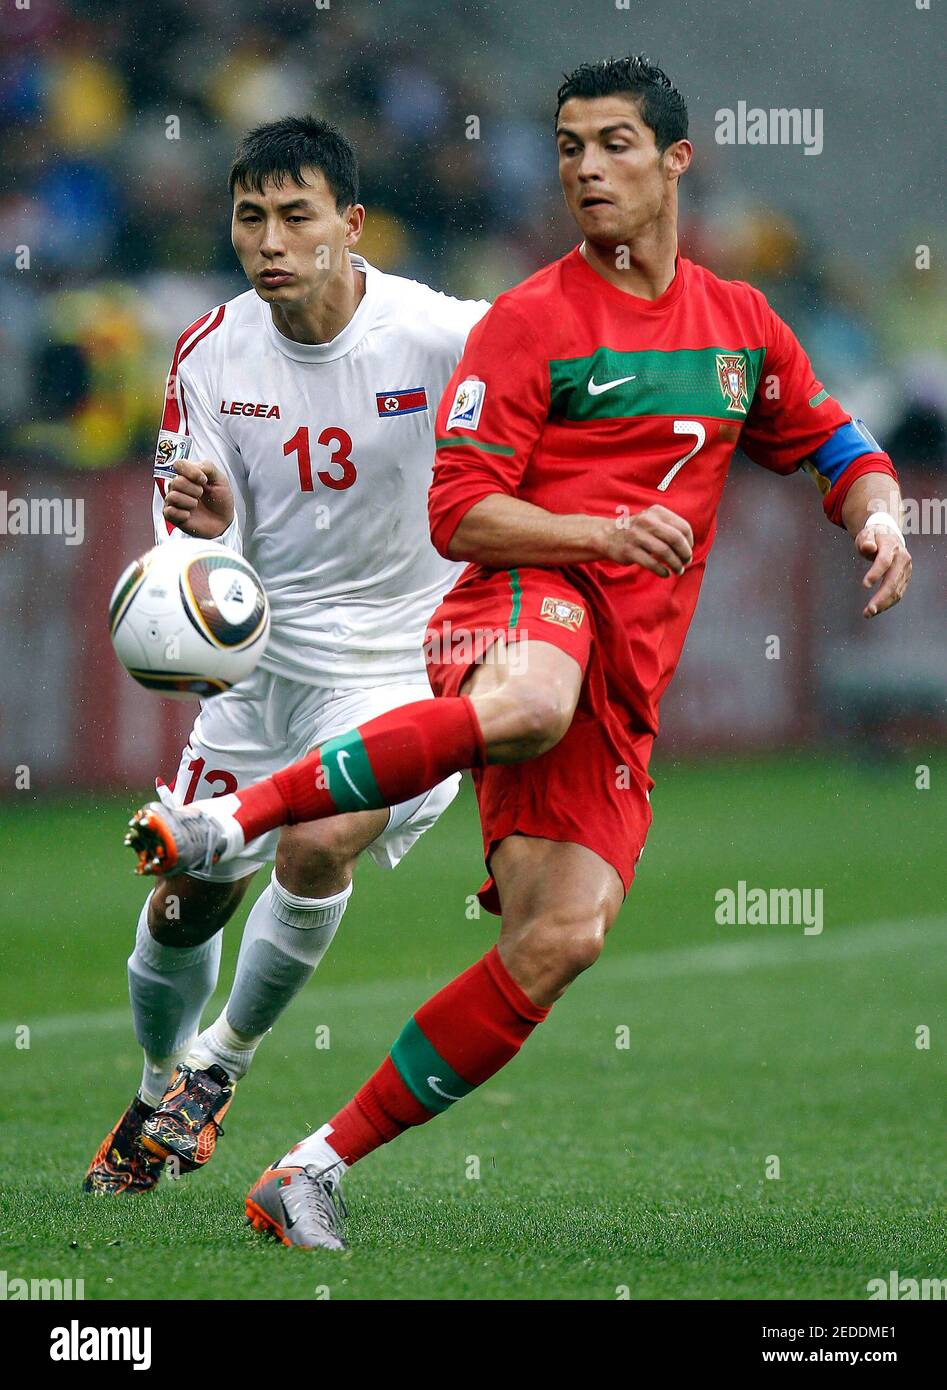 Football - Portugal v North Korea FIFA World Cup South Africa 2010 - Group  G - Green Point Stadium, Cape Town, South Africa - 21/6/10 Portugal's  Cristiano Ronaldo and Chol Jin Pak